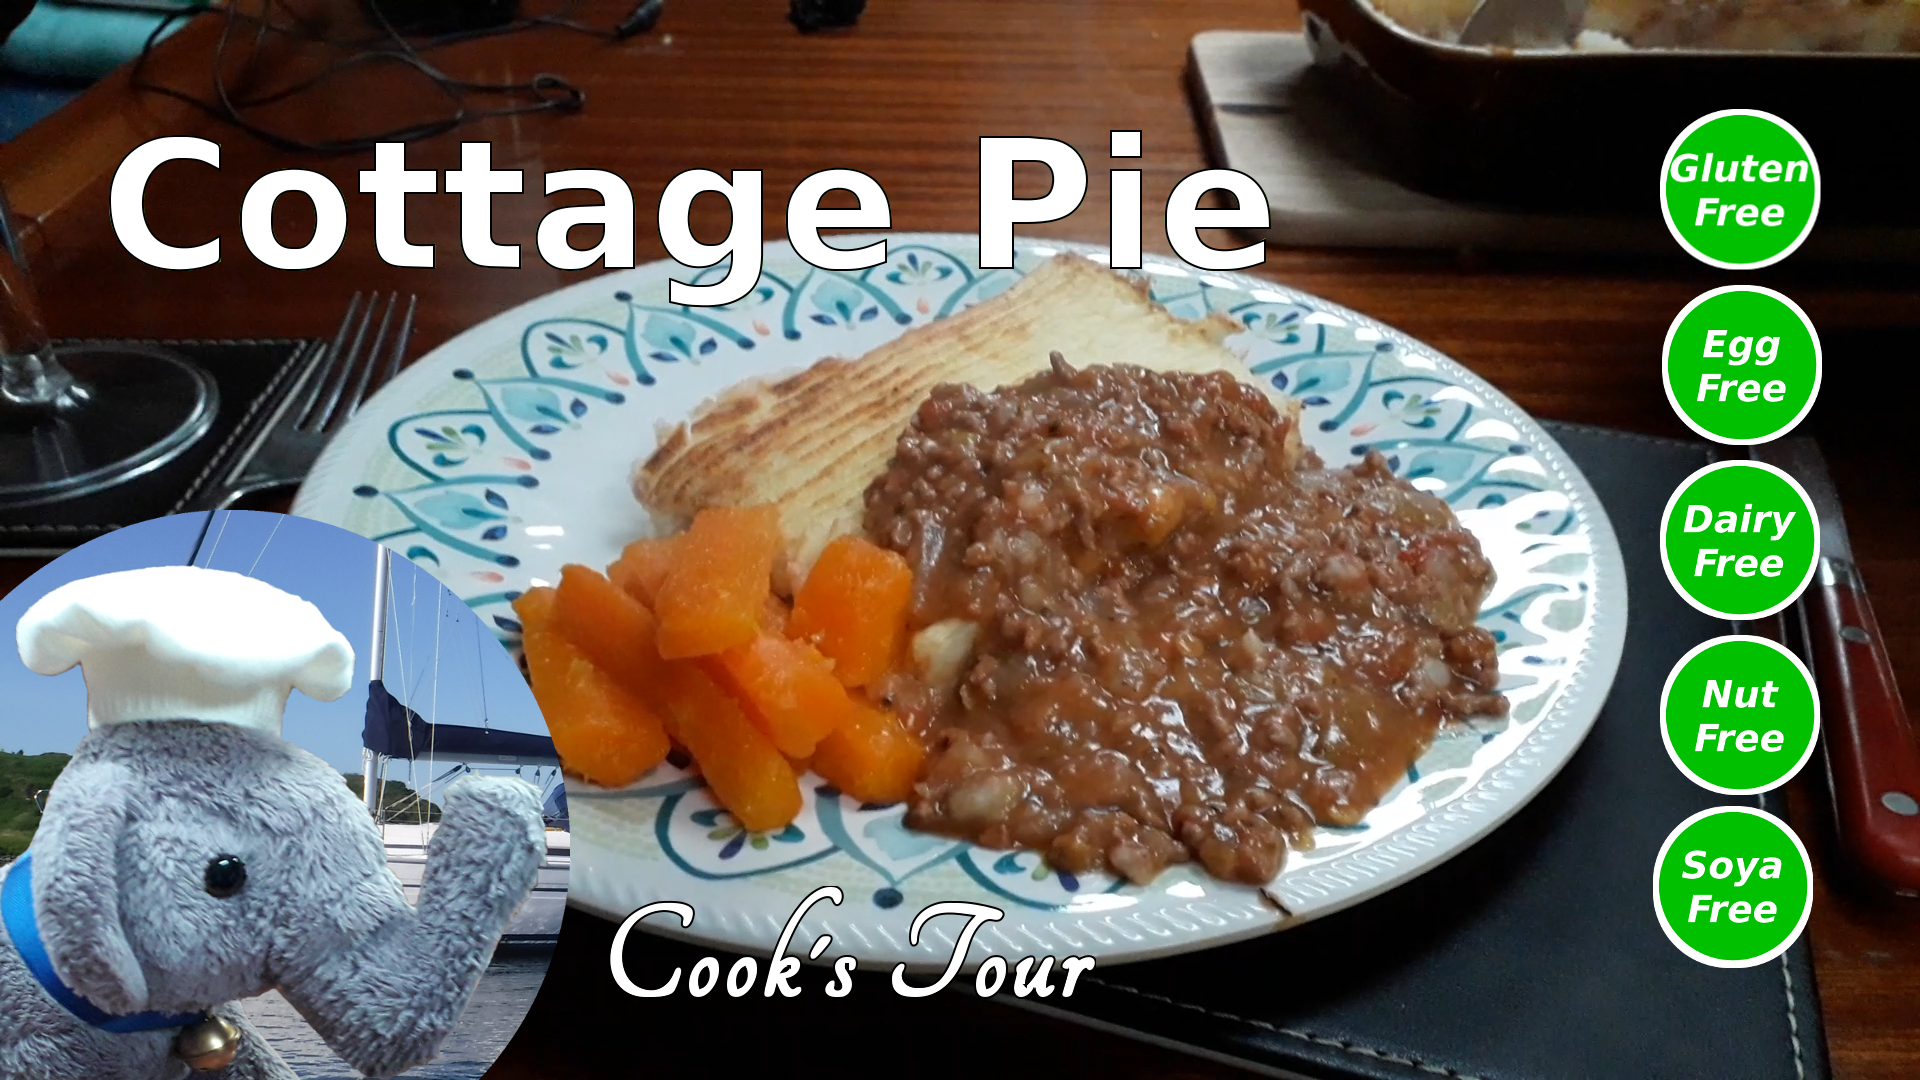 Watch our "Cottage Pie" episode and add comments etc.